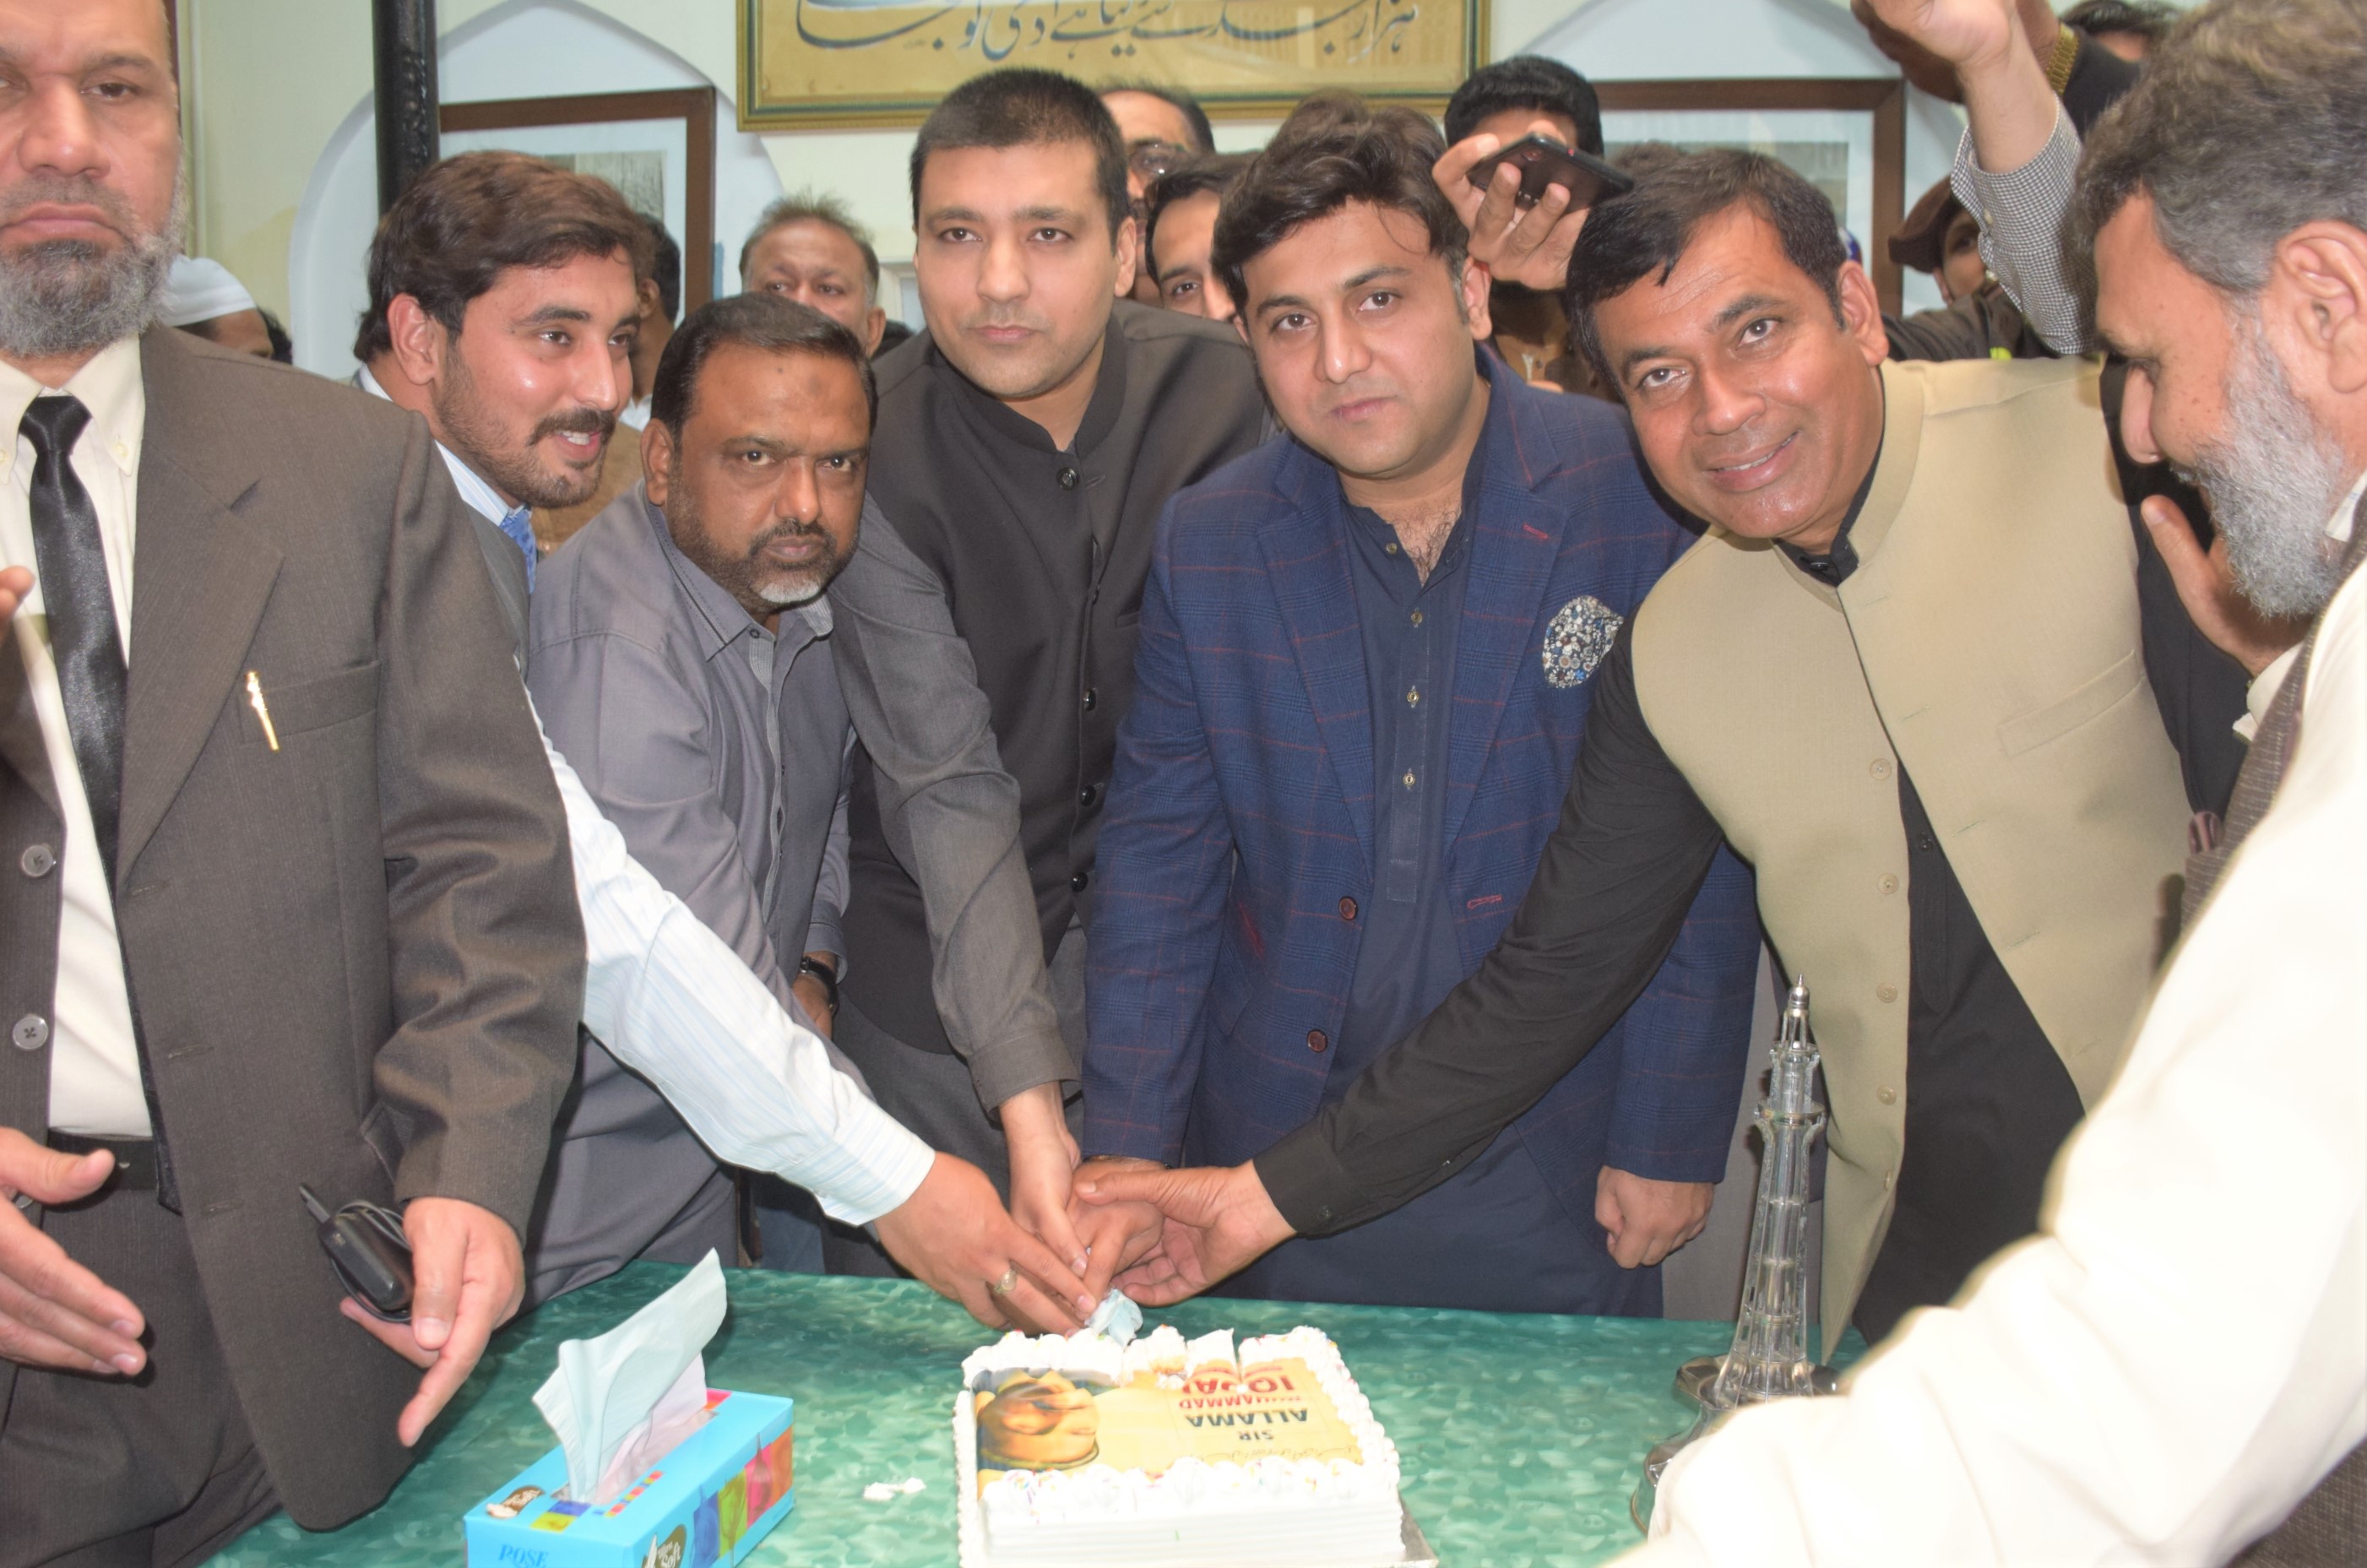 On November 09, 2021, Sialkot Chamber of Commerce & Industry hosted a Cake Cutting Ceremony to celebrate the 144th birth anniversary of the “Poet of the East” Dr. Allama Muhammad Iqbal at Iqbal Manzil Sialkot to commemorate his contributions for the Muslims of the subcontinent.   During the occasion, Senior Vice President, Vice President and Executive Committee SCCI paid homage to Allama Muhmmad Iqbal and said that he has rendered great services for the promotion of Muslim cause by infusing a revolutionary spirit in them. Now, it is our responsibility to play our role in the building of the nation while exploring thoughts of Allama Muhammad Iqbal.